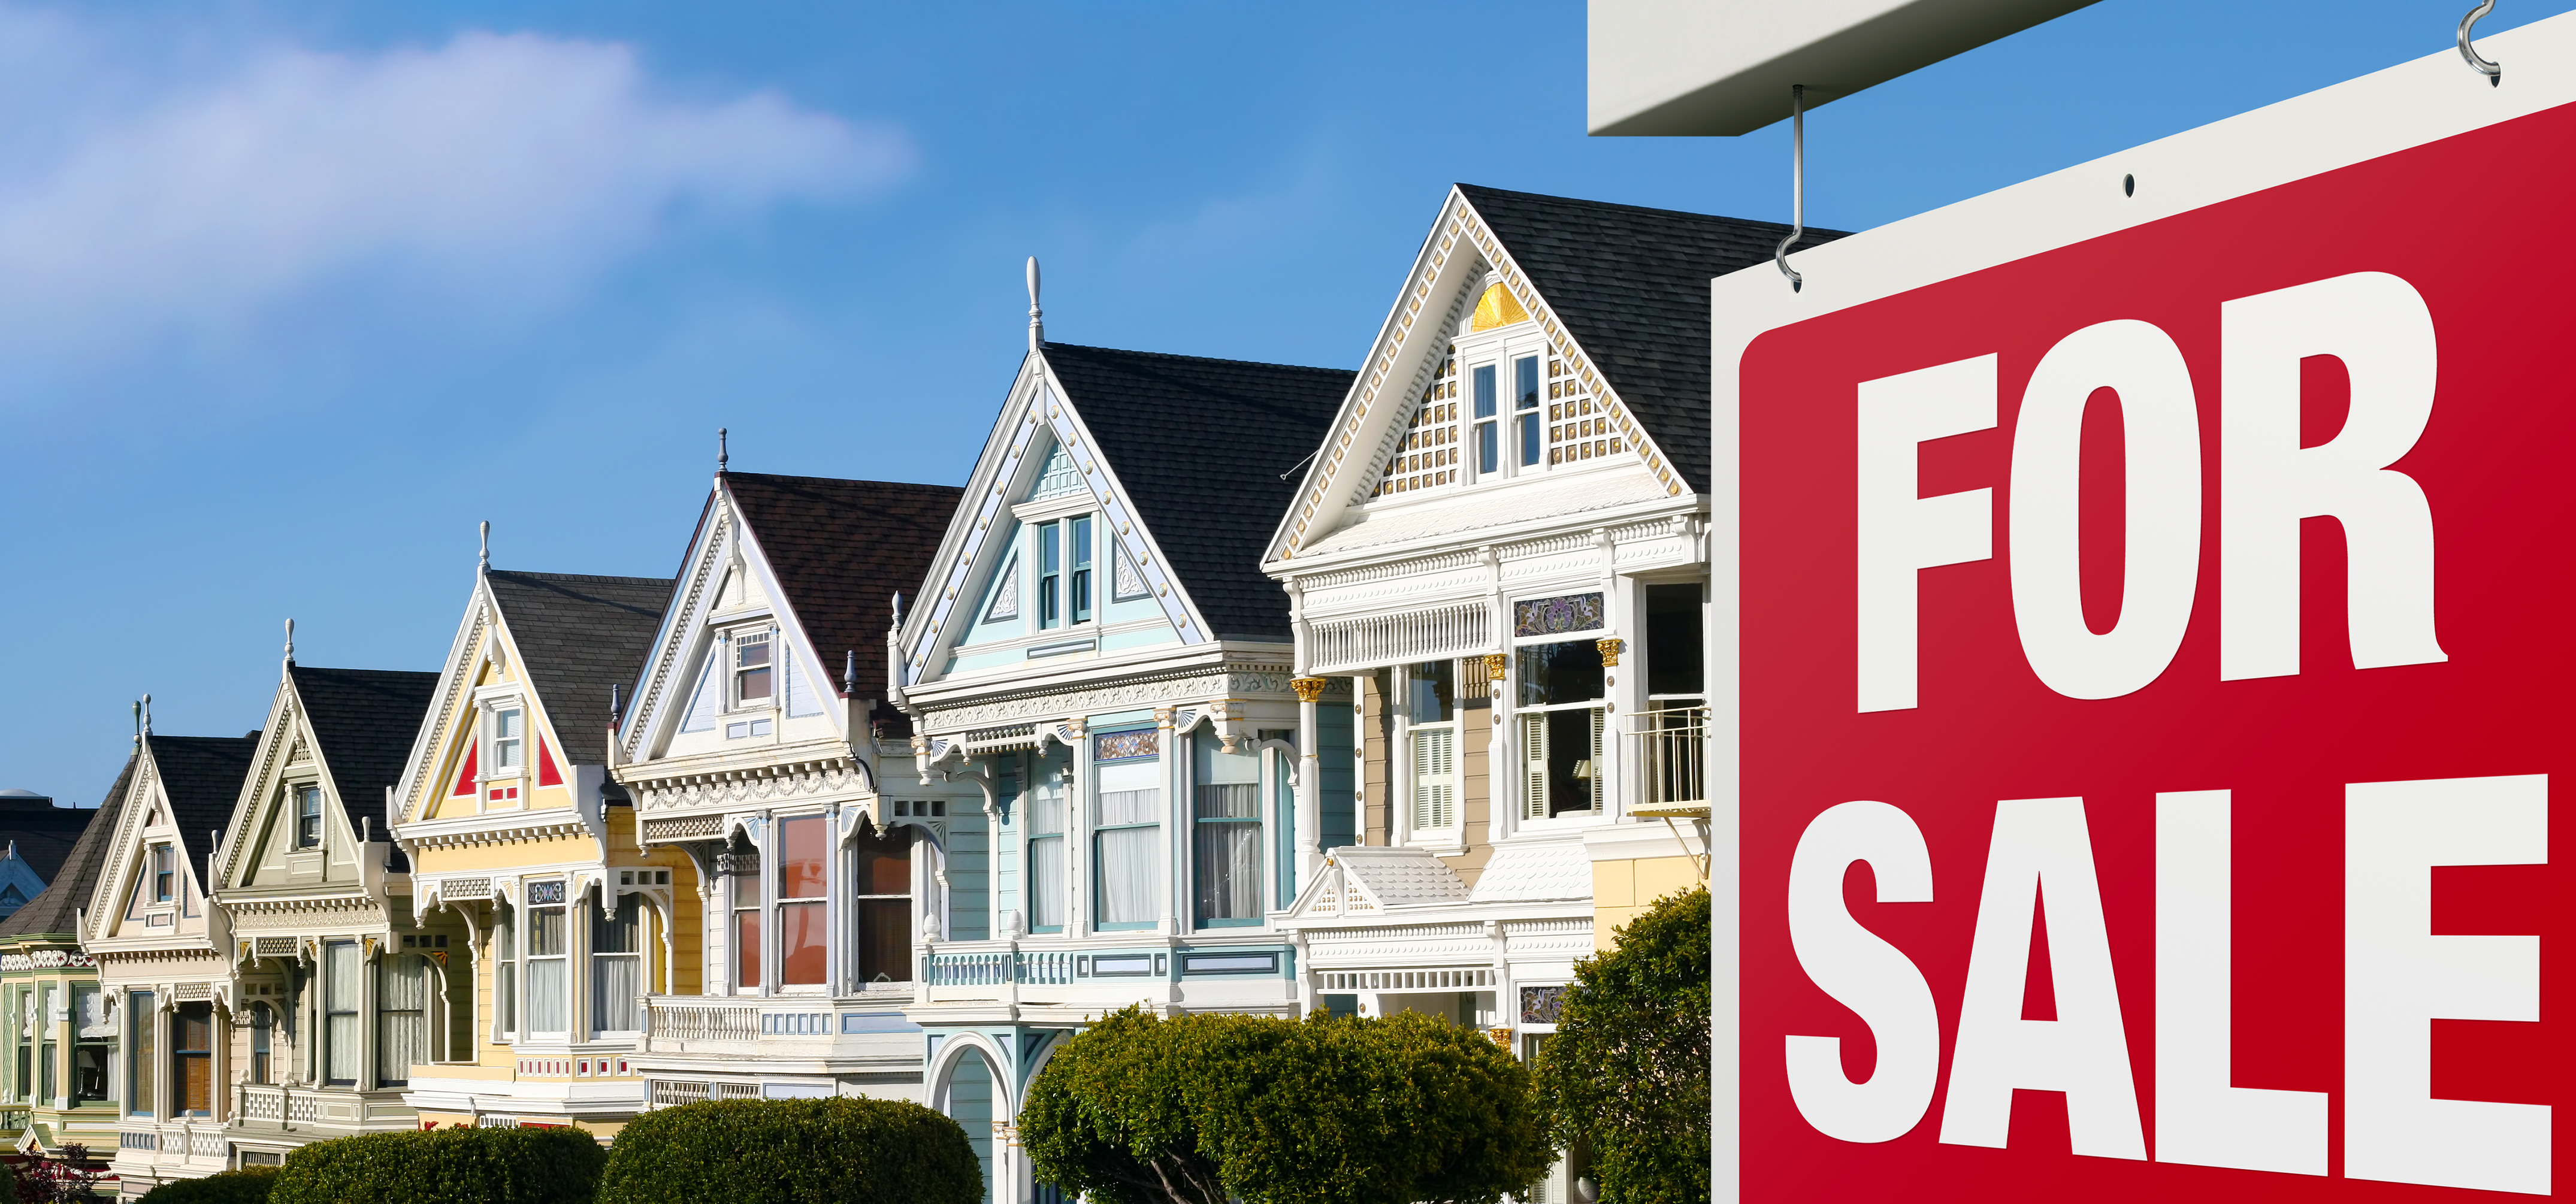 A row of colorful Victorian homes with a red and white “for sale” sign in font.